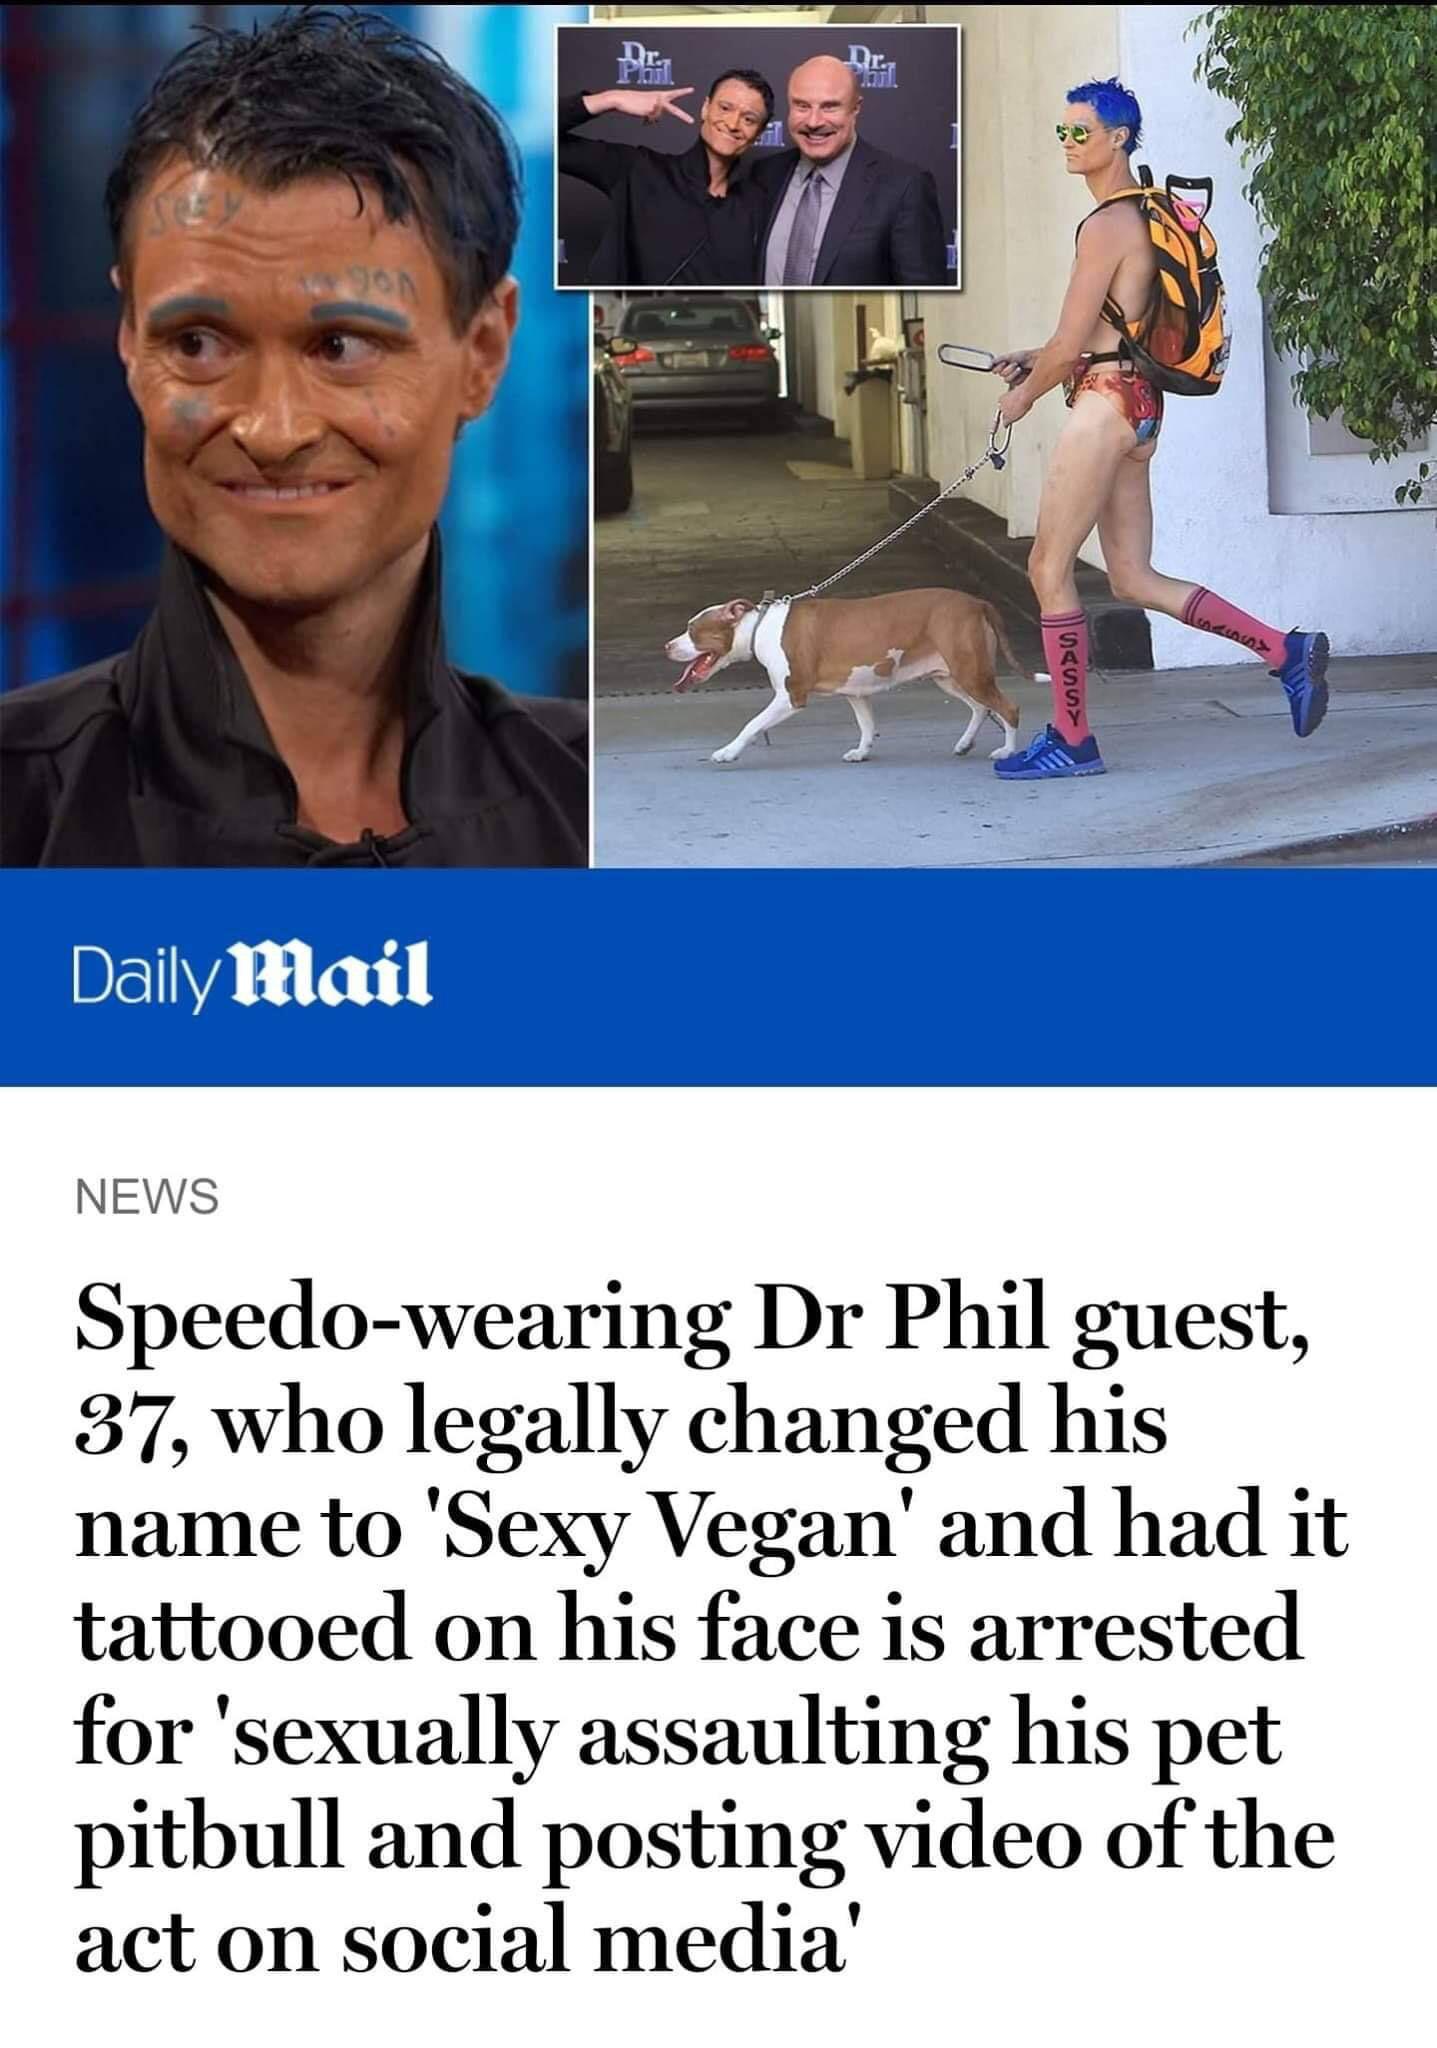 sexy vegan dog sexual assault - Det 0 Daily Mail News Speedowearing Dr Phil guest, 37, who legally changed his name to 'Sexy Vegan' and had it tattooed on his face is arrested for 'sexually assaulting his pet pitbull and posting video of the act on social